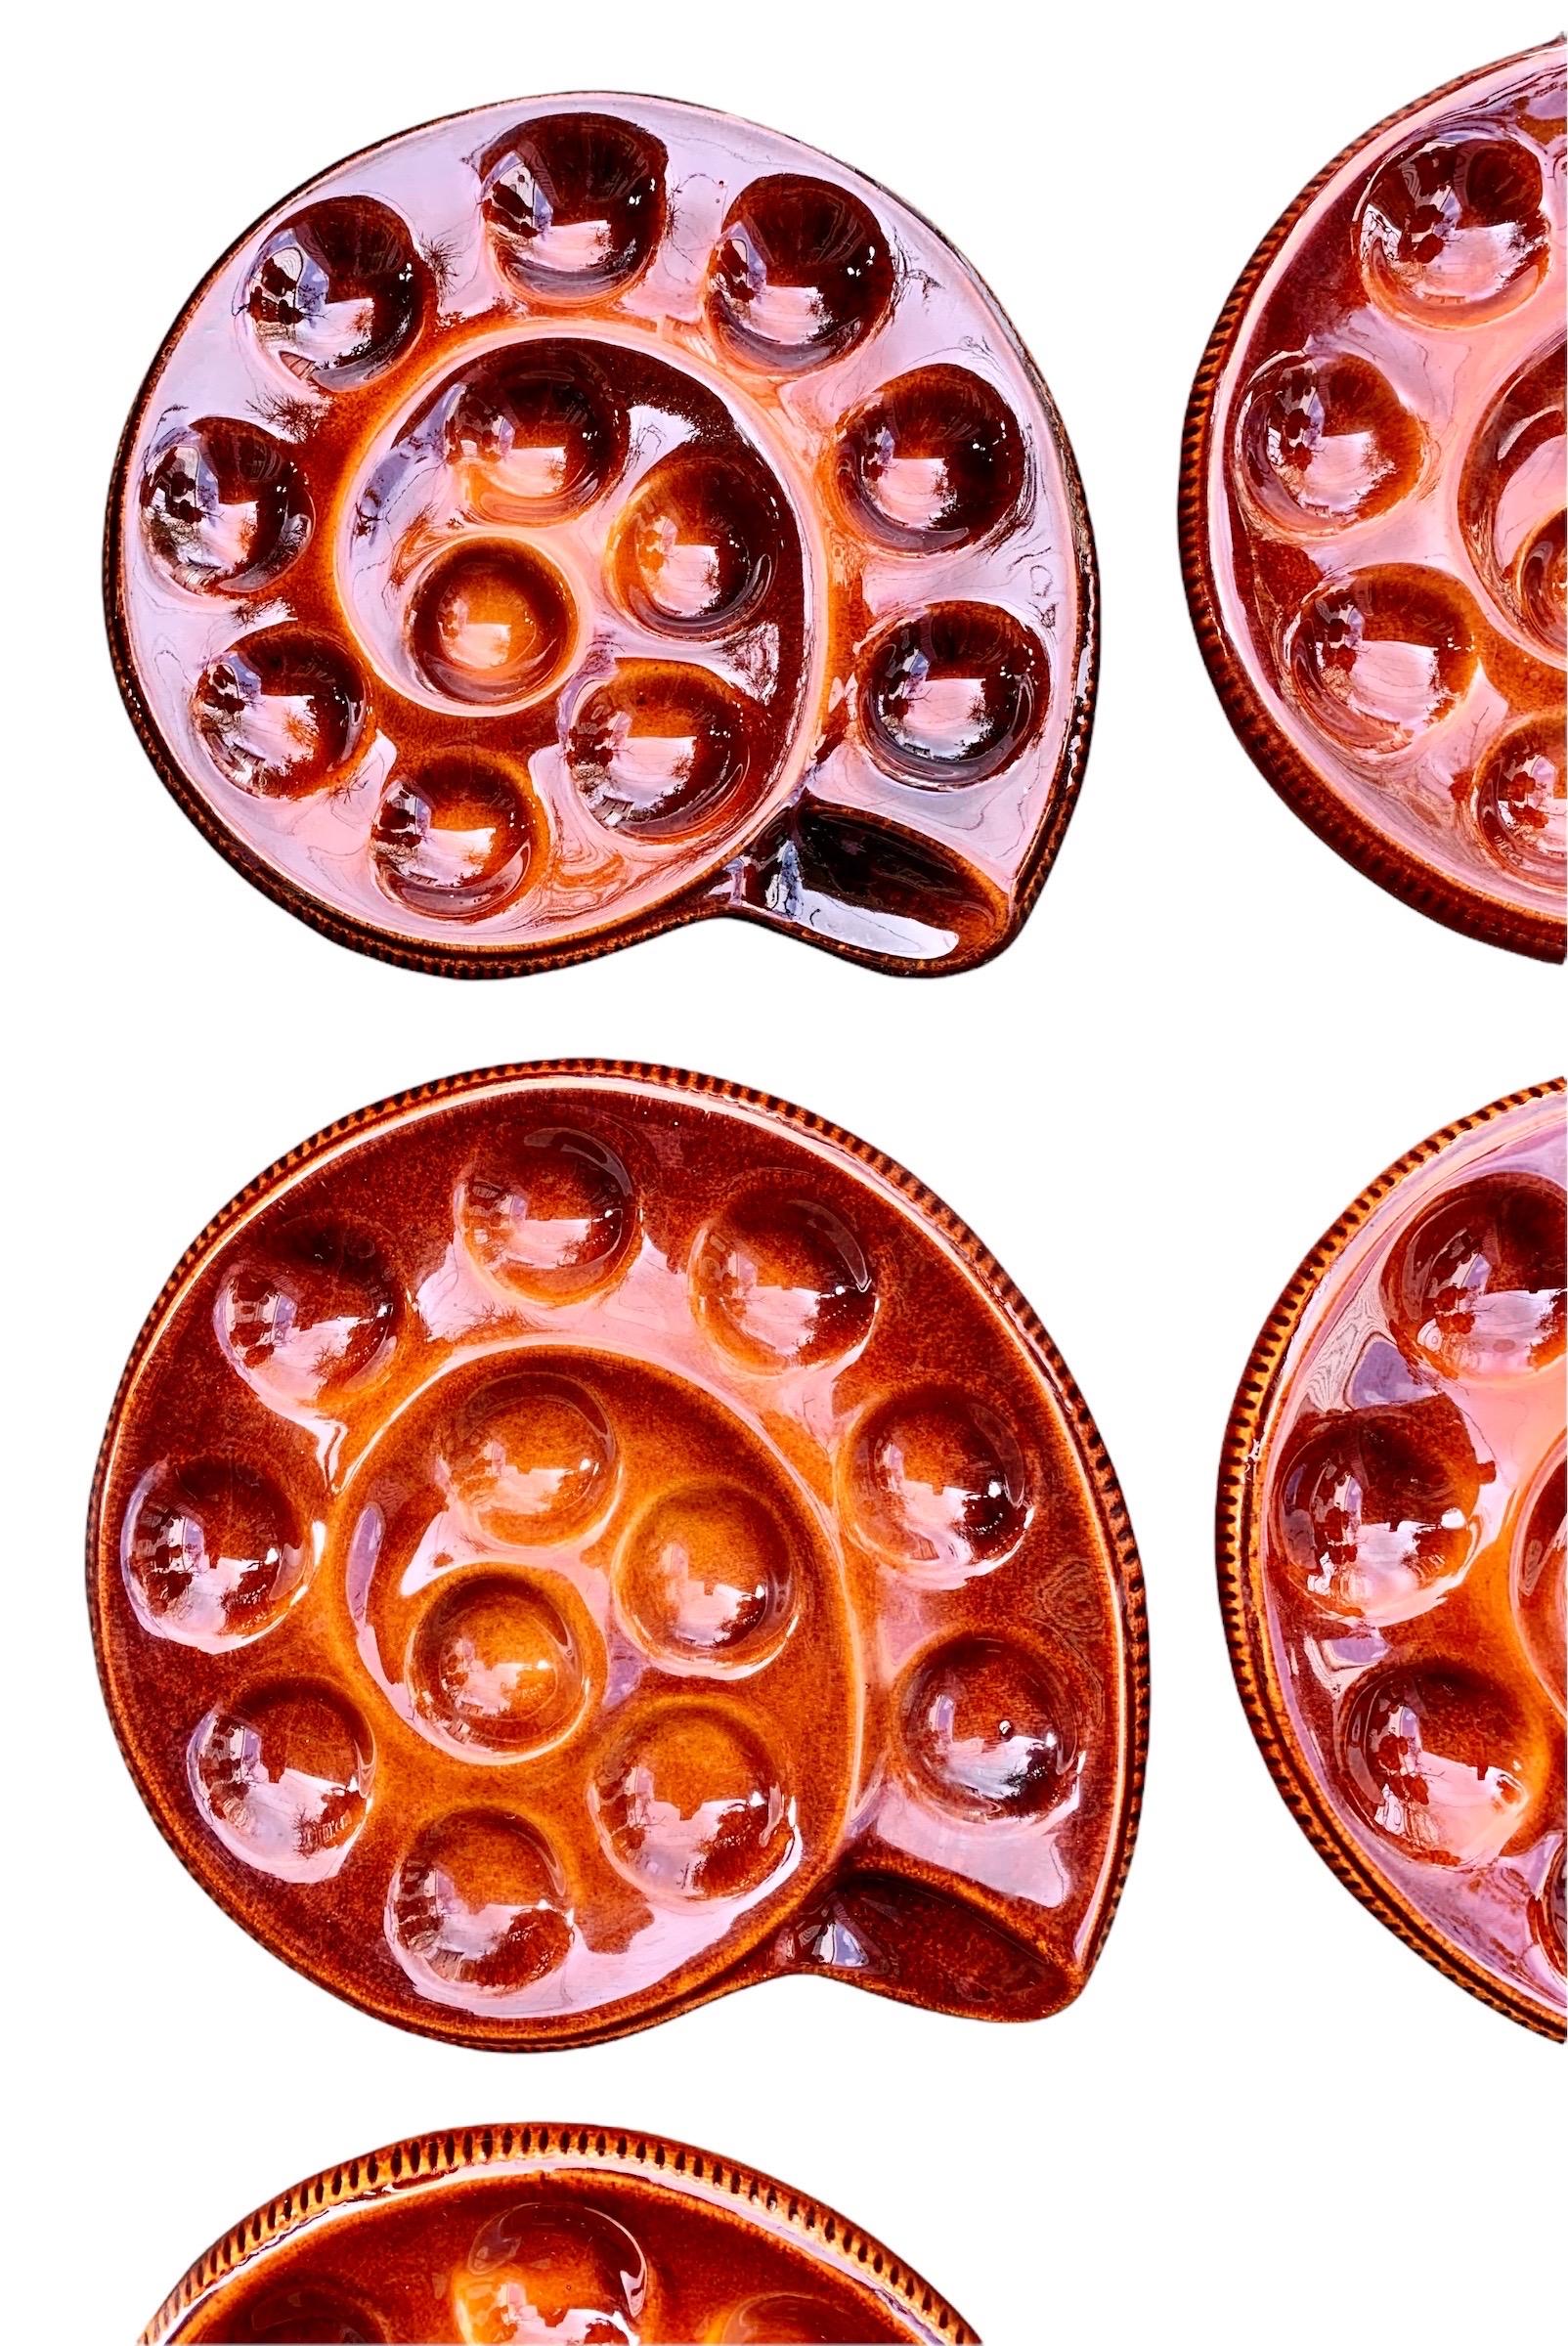 A stunning set of eight vintage French faience escargot plates by the French Faiencerie, St Clements, having twelve wells for your snails. Circa 1950's.

In the most charming shape of a snail and in a beautiful dark caramel color, these would set